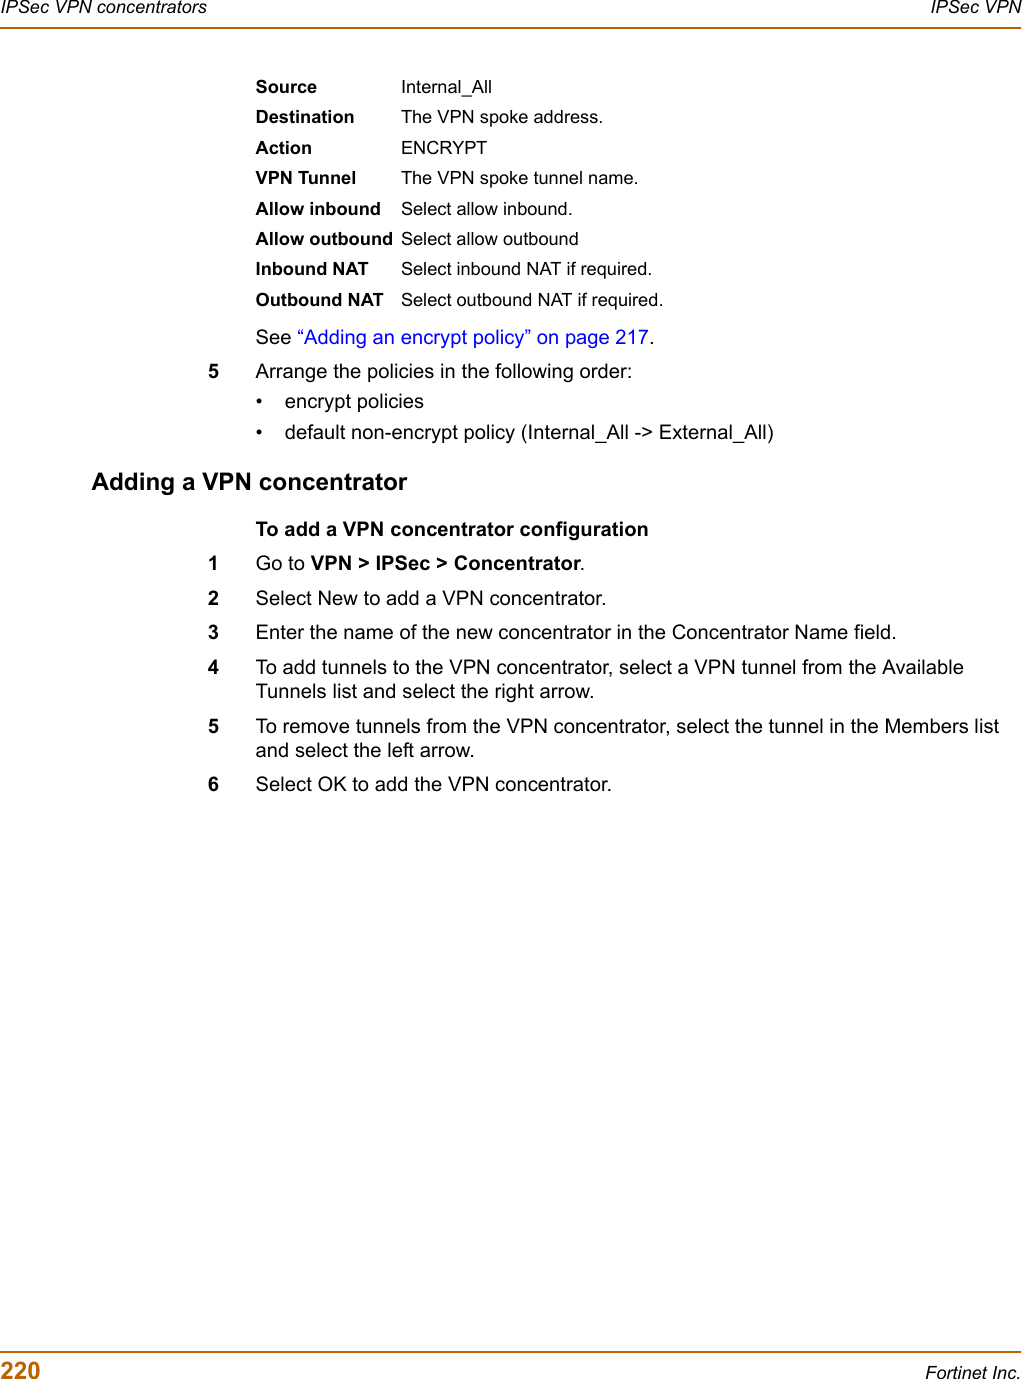 220 Fortinet Inc.IPSec VPN concentrators IPSec VPNSee “Adding an encrypt policy” on page 217.5Arrange the policies in the following order:• encrypt policies• default non-encrypt policy (Internal_All -&gt; External_All)Adding a VPN concentratorTo add a VPN concentrator configuration1Go to VPN &gt; IPSec &gt; Concentrator.2Select New to add a VPN concentrator.3Enter the name of the new concentrator in the Concentrator Name field.4To add tunnels to the VPN concentrator, select a VPN tunnel from the Available Tunnels list and select the right arrow.5To remove tunnels from the VPN concentrator, select the tunnel in the Members list and select the left arrow.6Select OK to add the VPN concentrator.Source Internal_AllDestination The VPN spoke address.Action ENCRYPTVPN Tunnel The VPN spoke tunnel name.Allow inbound Select allow inbound.Allow outbound Select allow outboundInbound NAT Select inbound NAT if required.Outbound NAT Select outbound NAT if required.